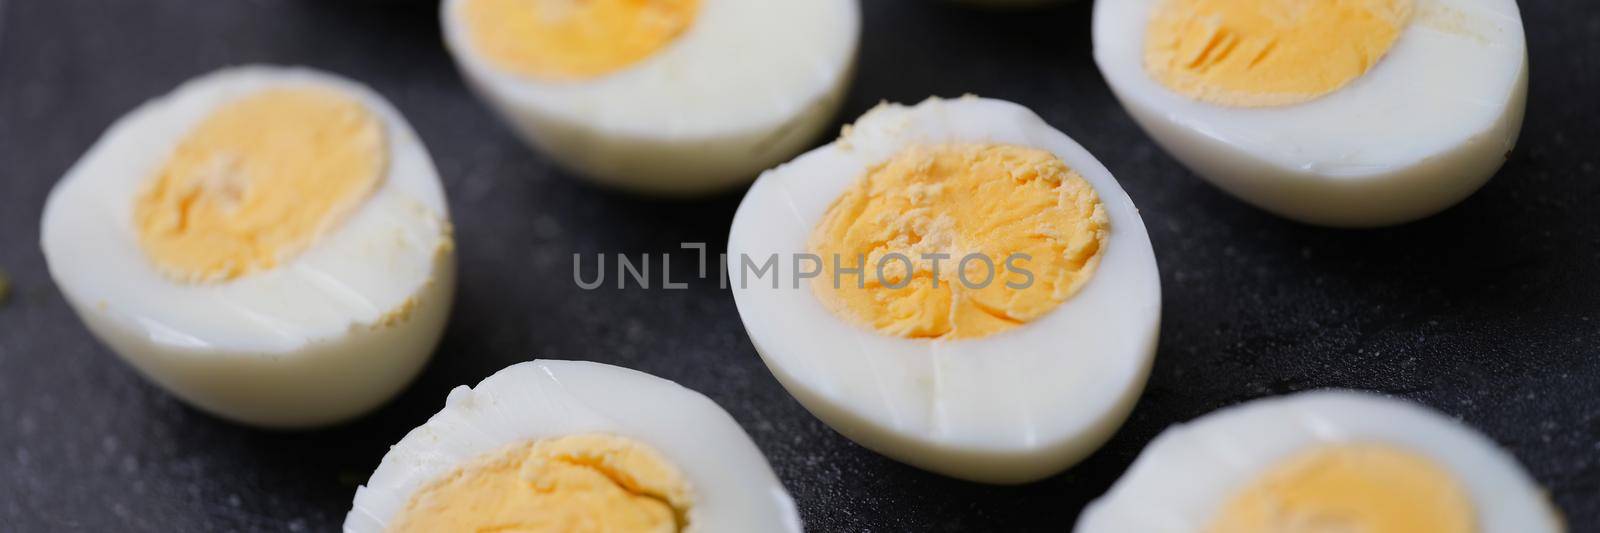 Chicken halves boiled eggs set on a black background, close-up. Harmless food, organic production. Calorie content of food